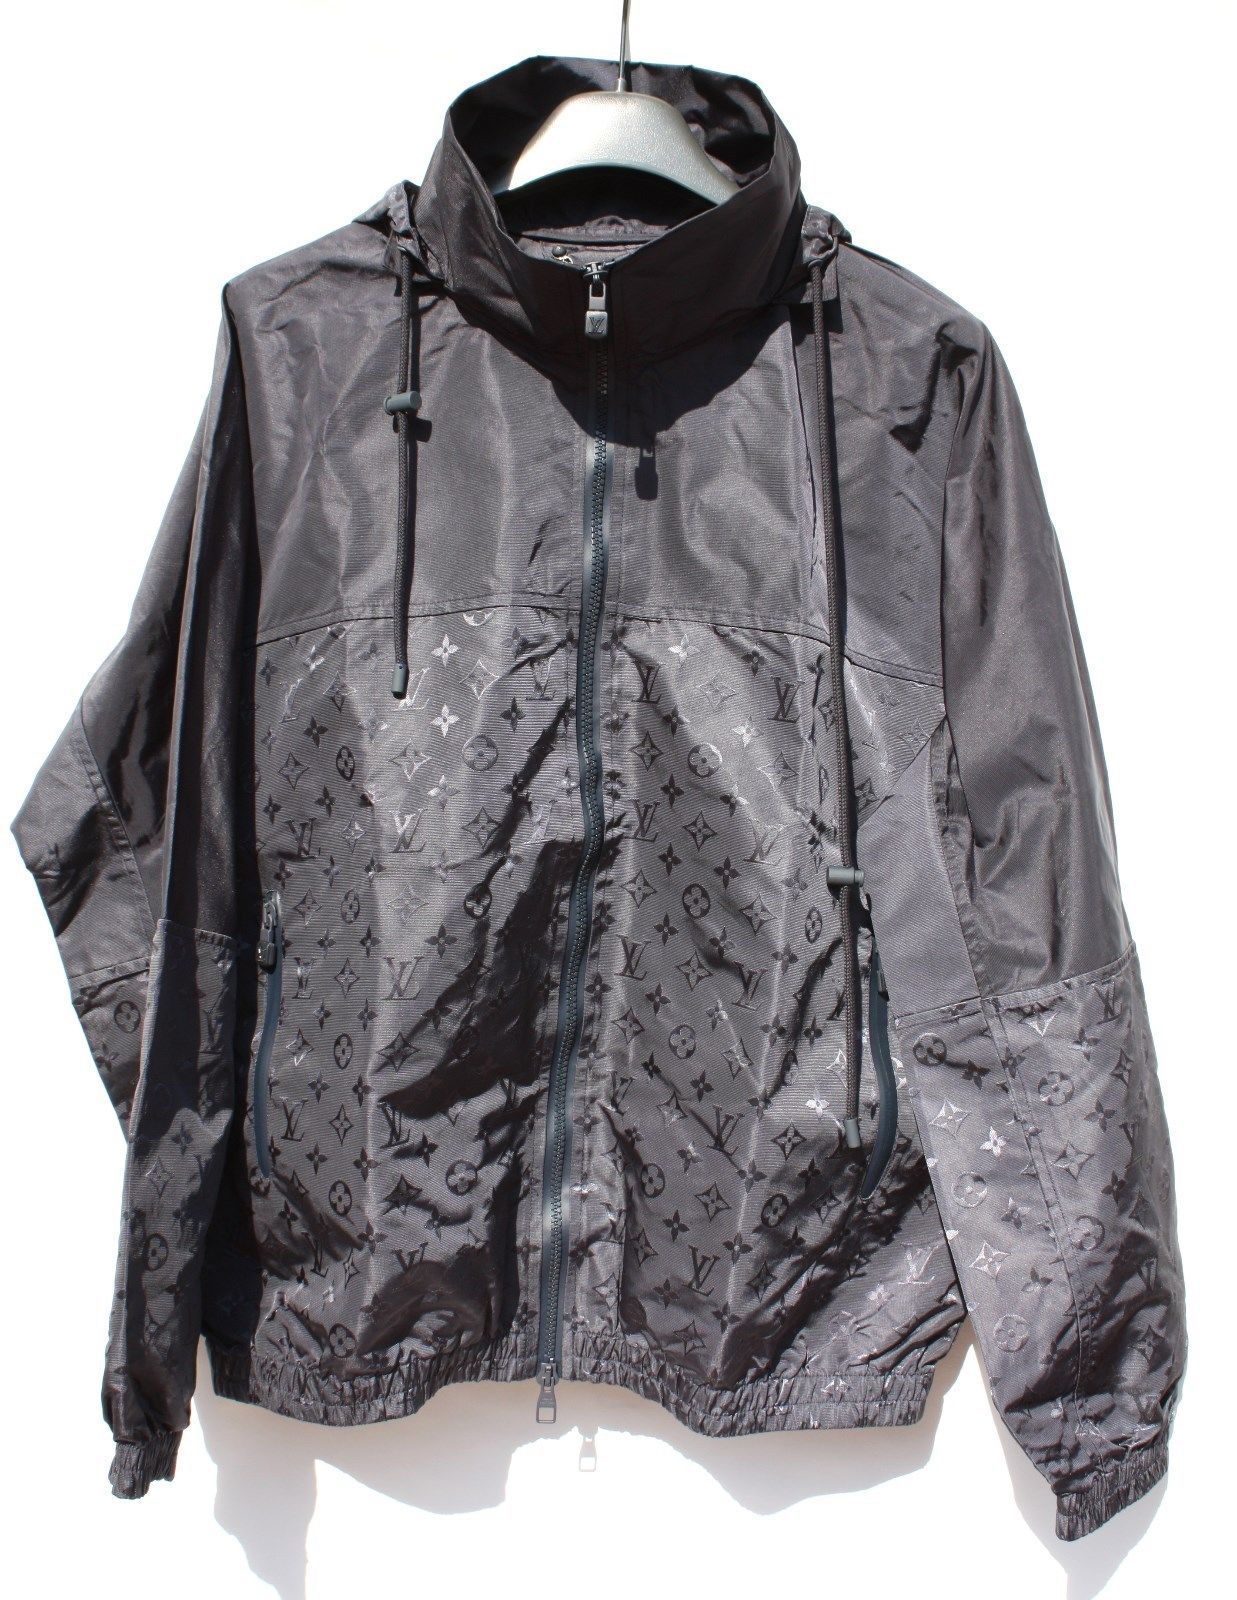 LV Reflective Rain Jacket/SOLD OUT